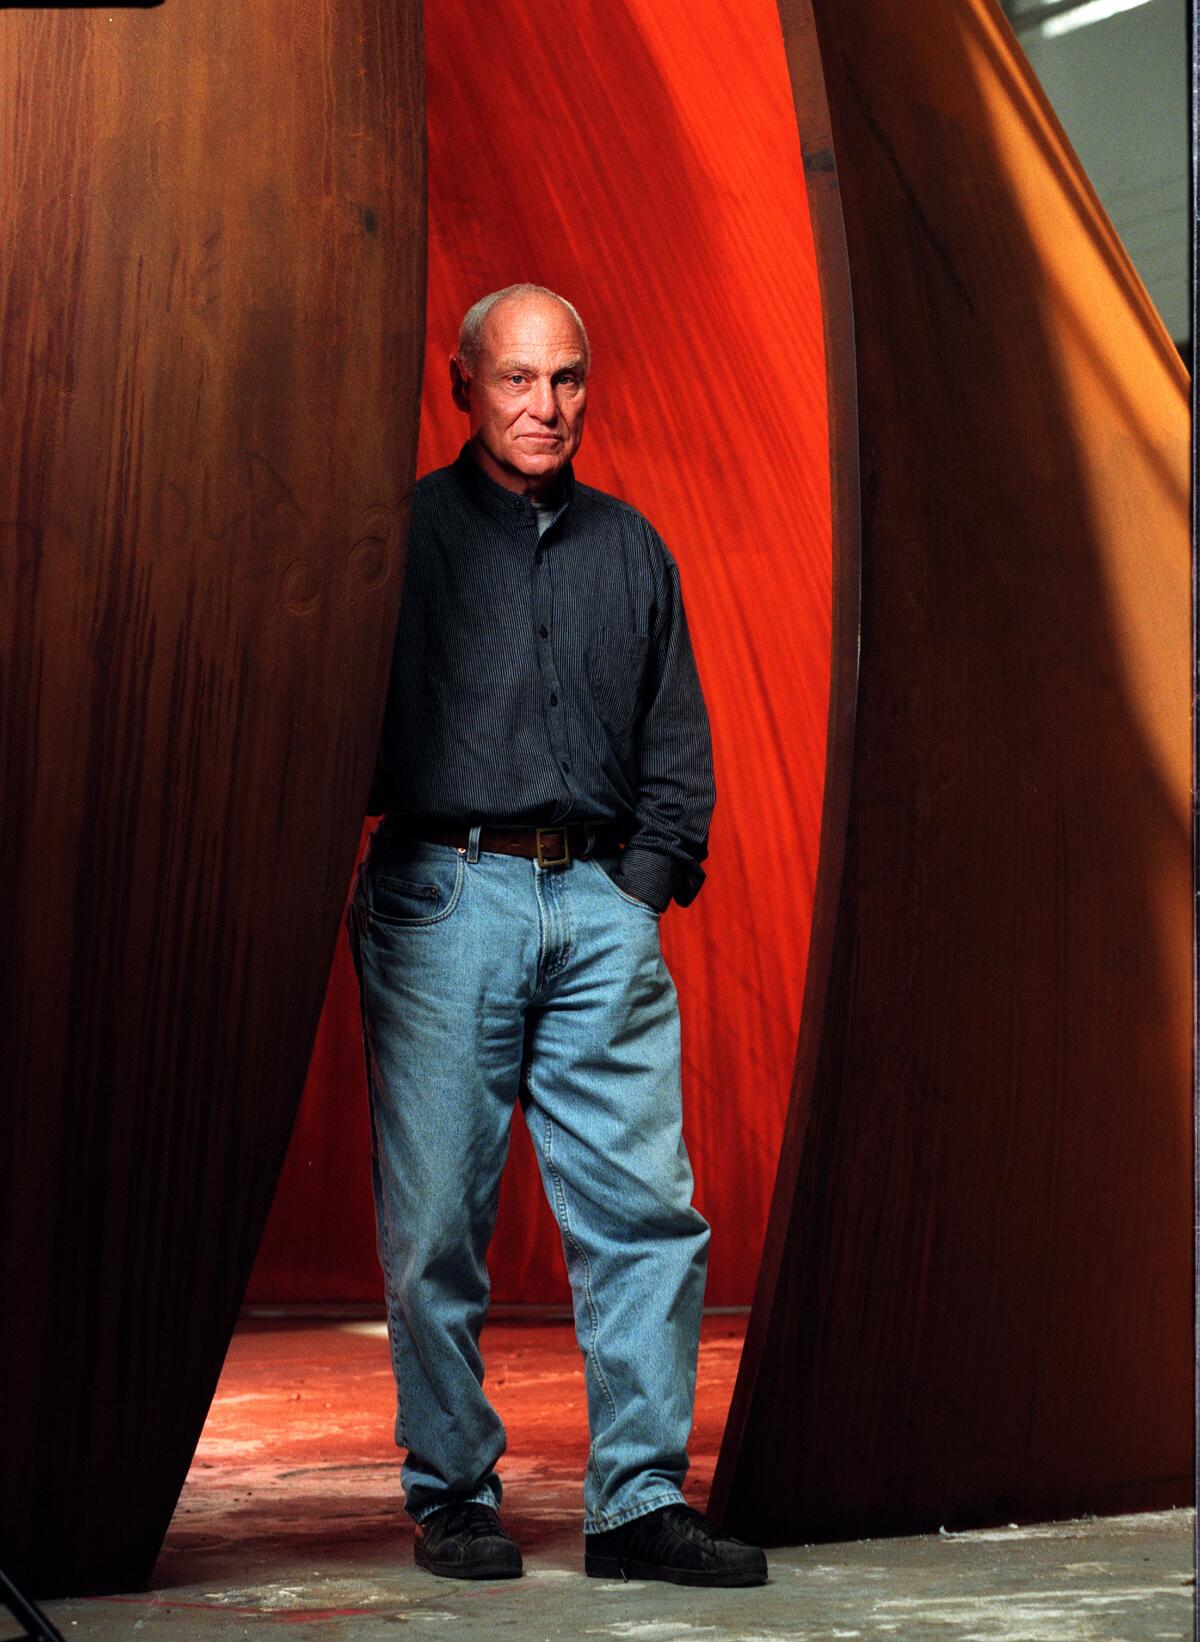 Sculptor Richard Serra, in jeans and a collared shirt, stands in a steel sculpture.